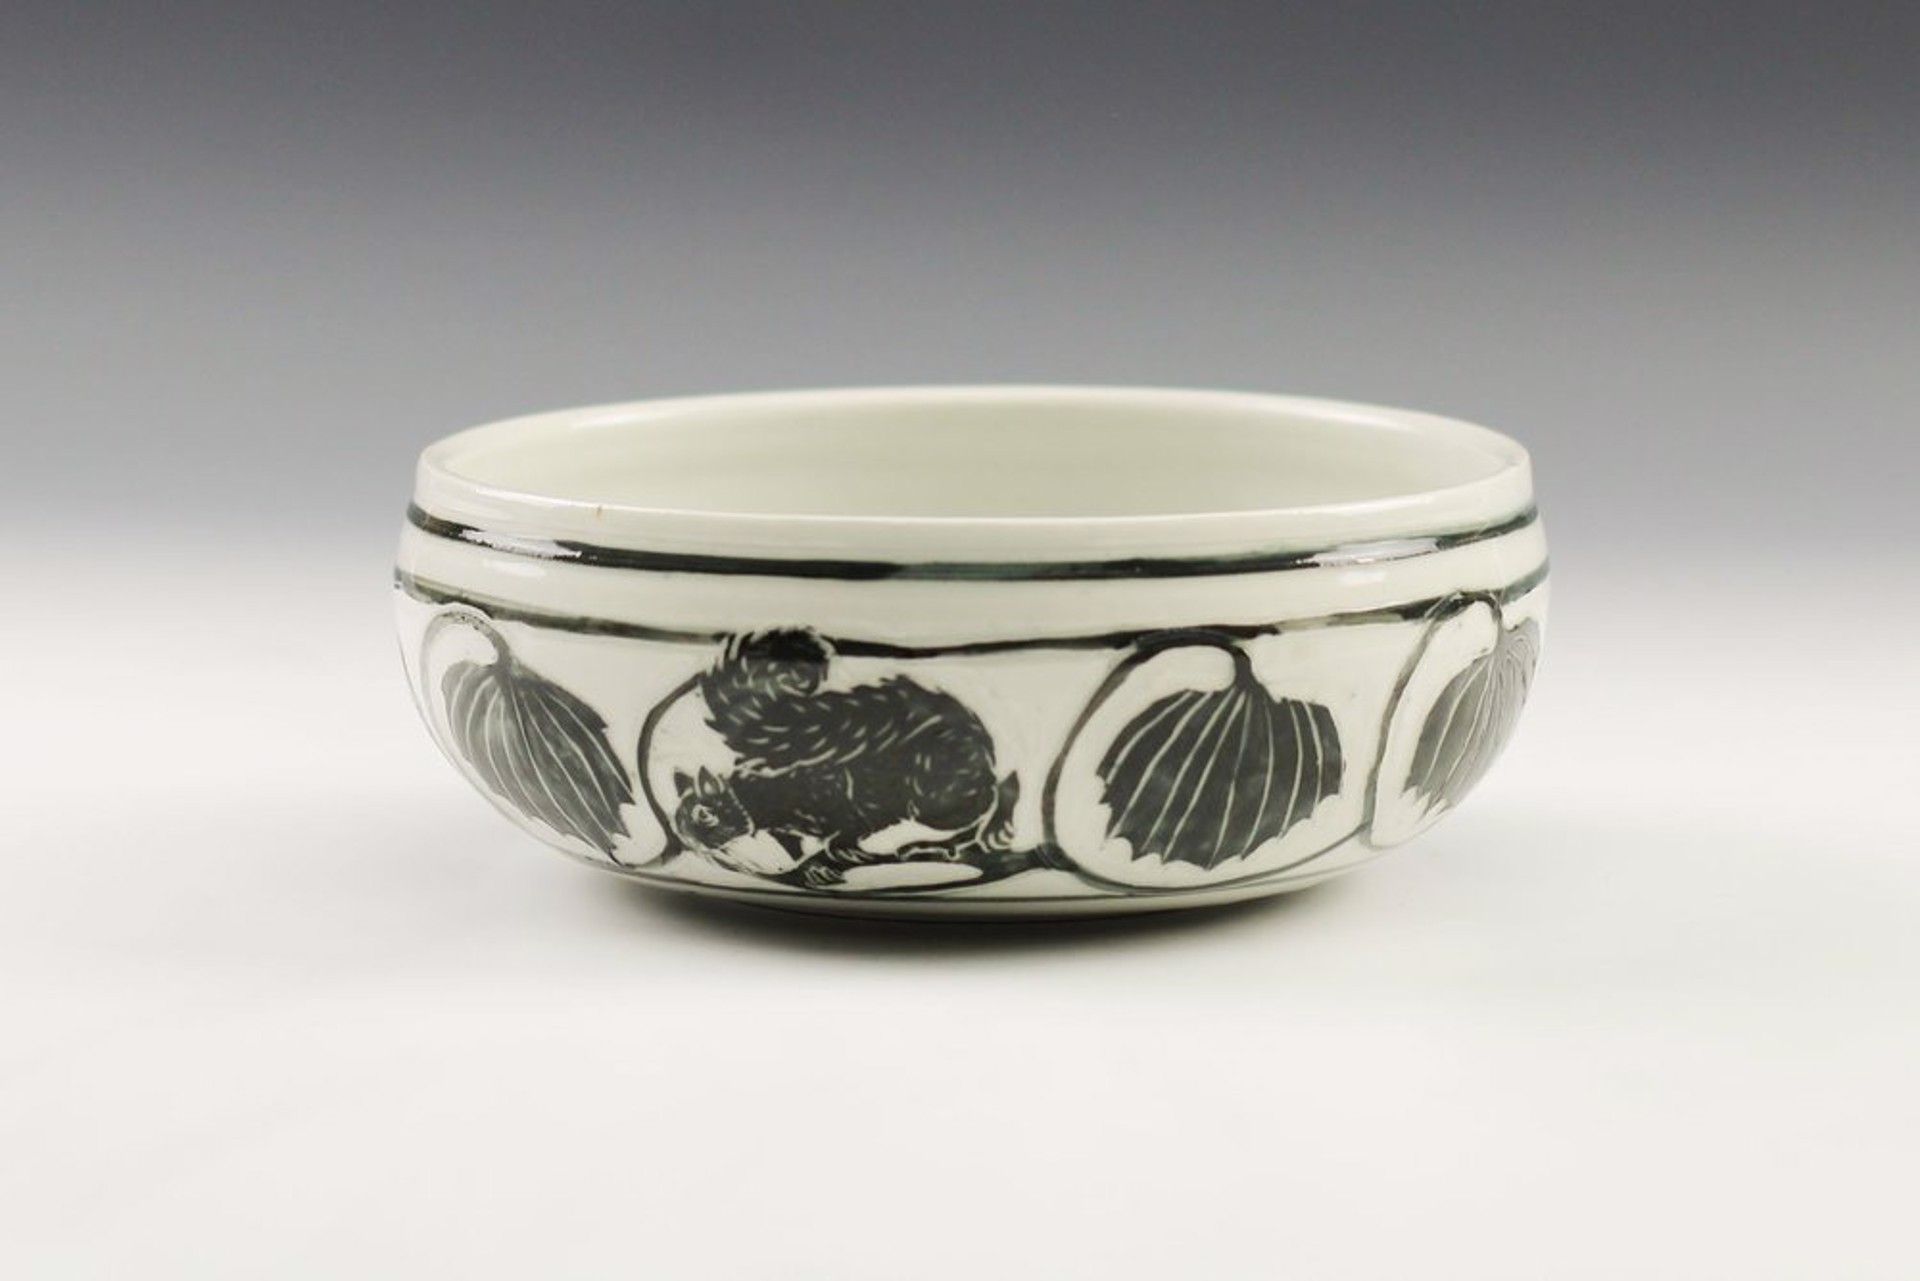 Squirrels and Leaves Serving Bowl by Glynnis Lessing